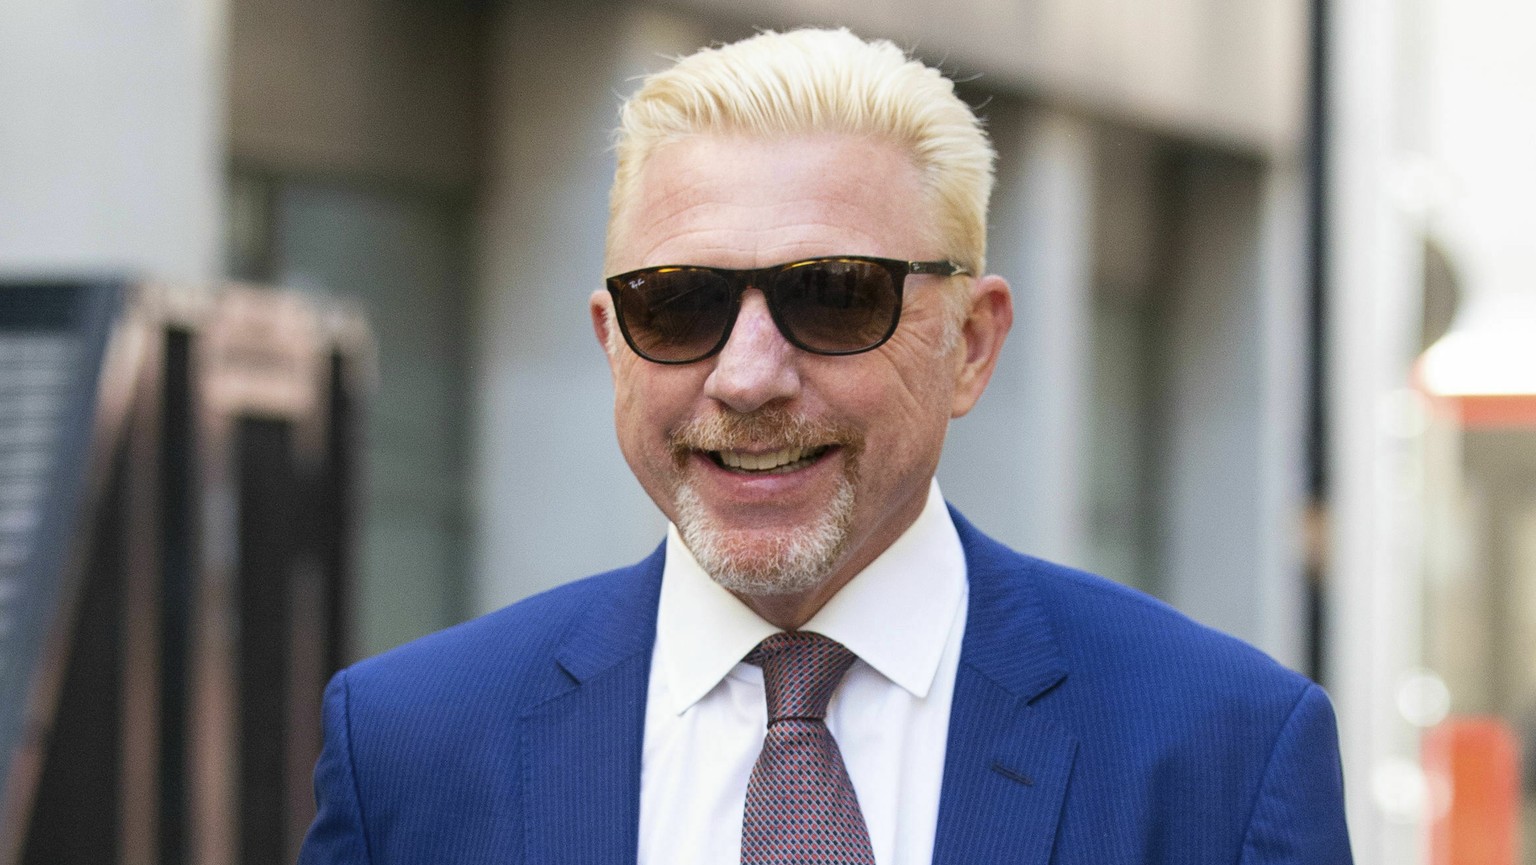 German former tennis player Boris Becker leaves the Central Family Court, after reaching an agreement with his estranged wife Lilly following a dispute over their son, in London, Thursday May 16, 2019 ...